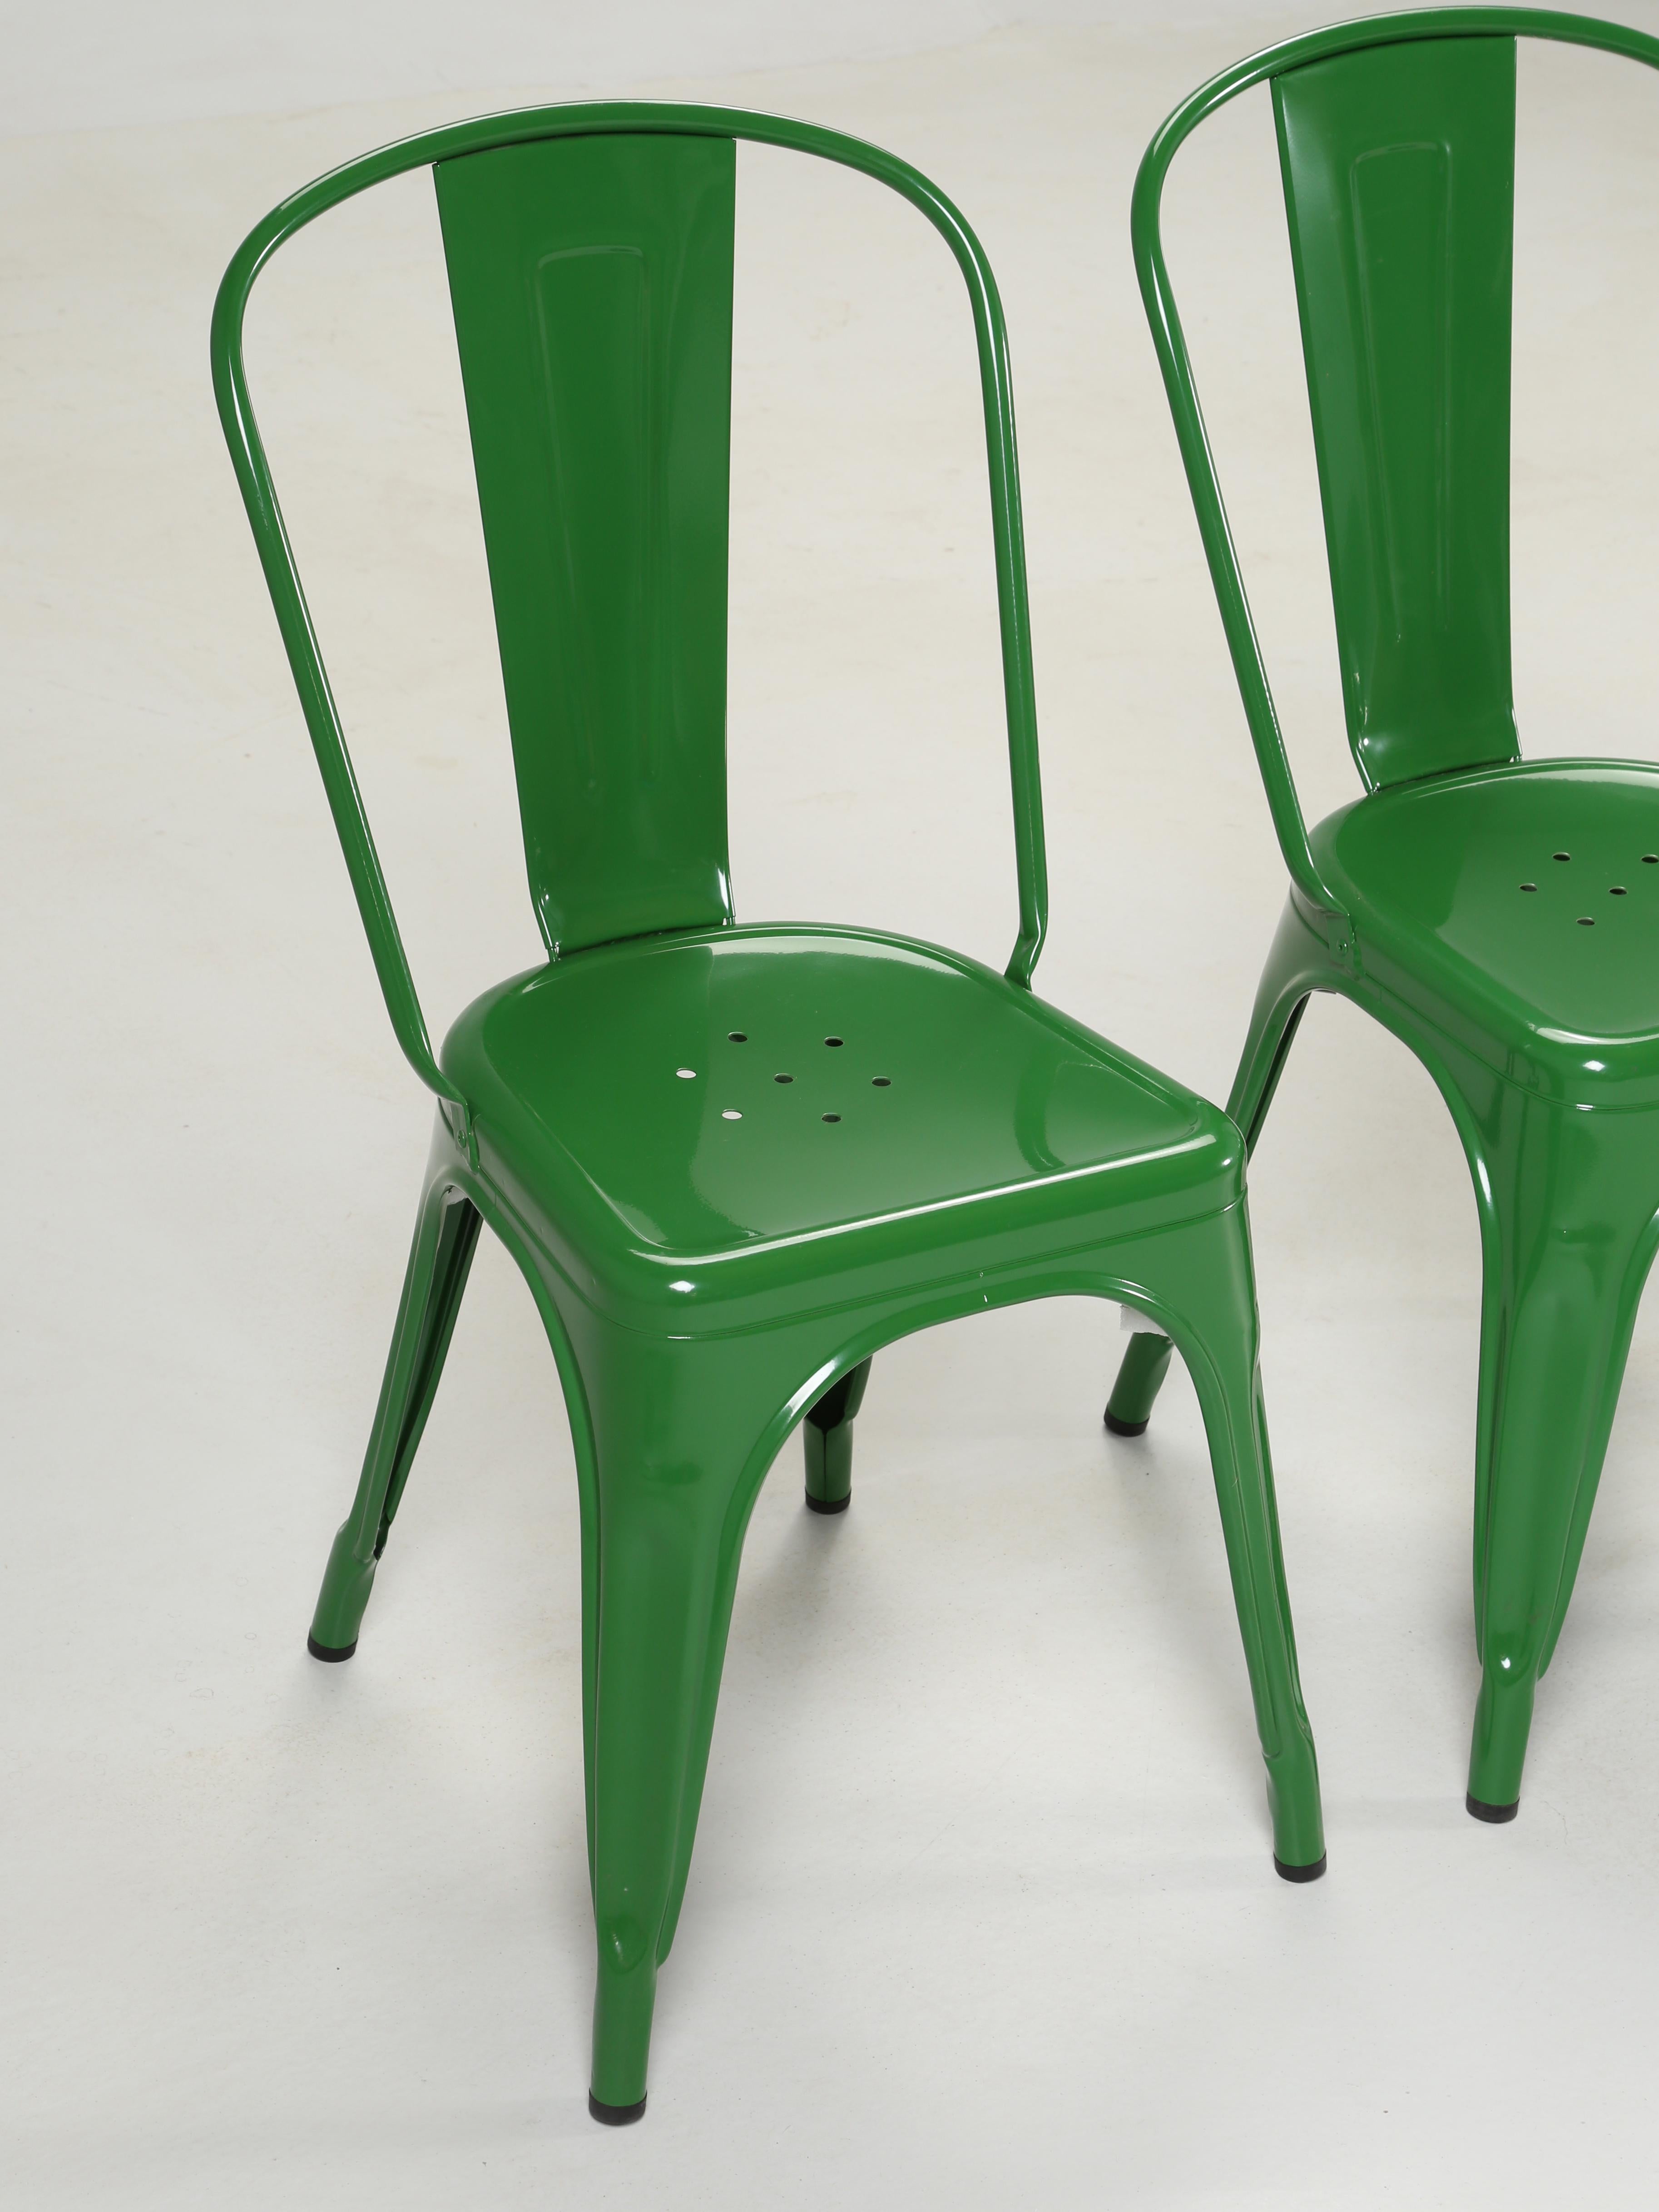 Hand-Crafted Genuine French Tolix Steel Stacking Chairs Set of '6' Romarin Dark Green